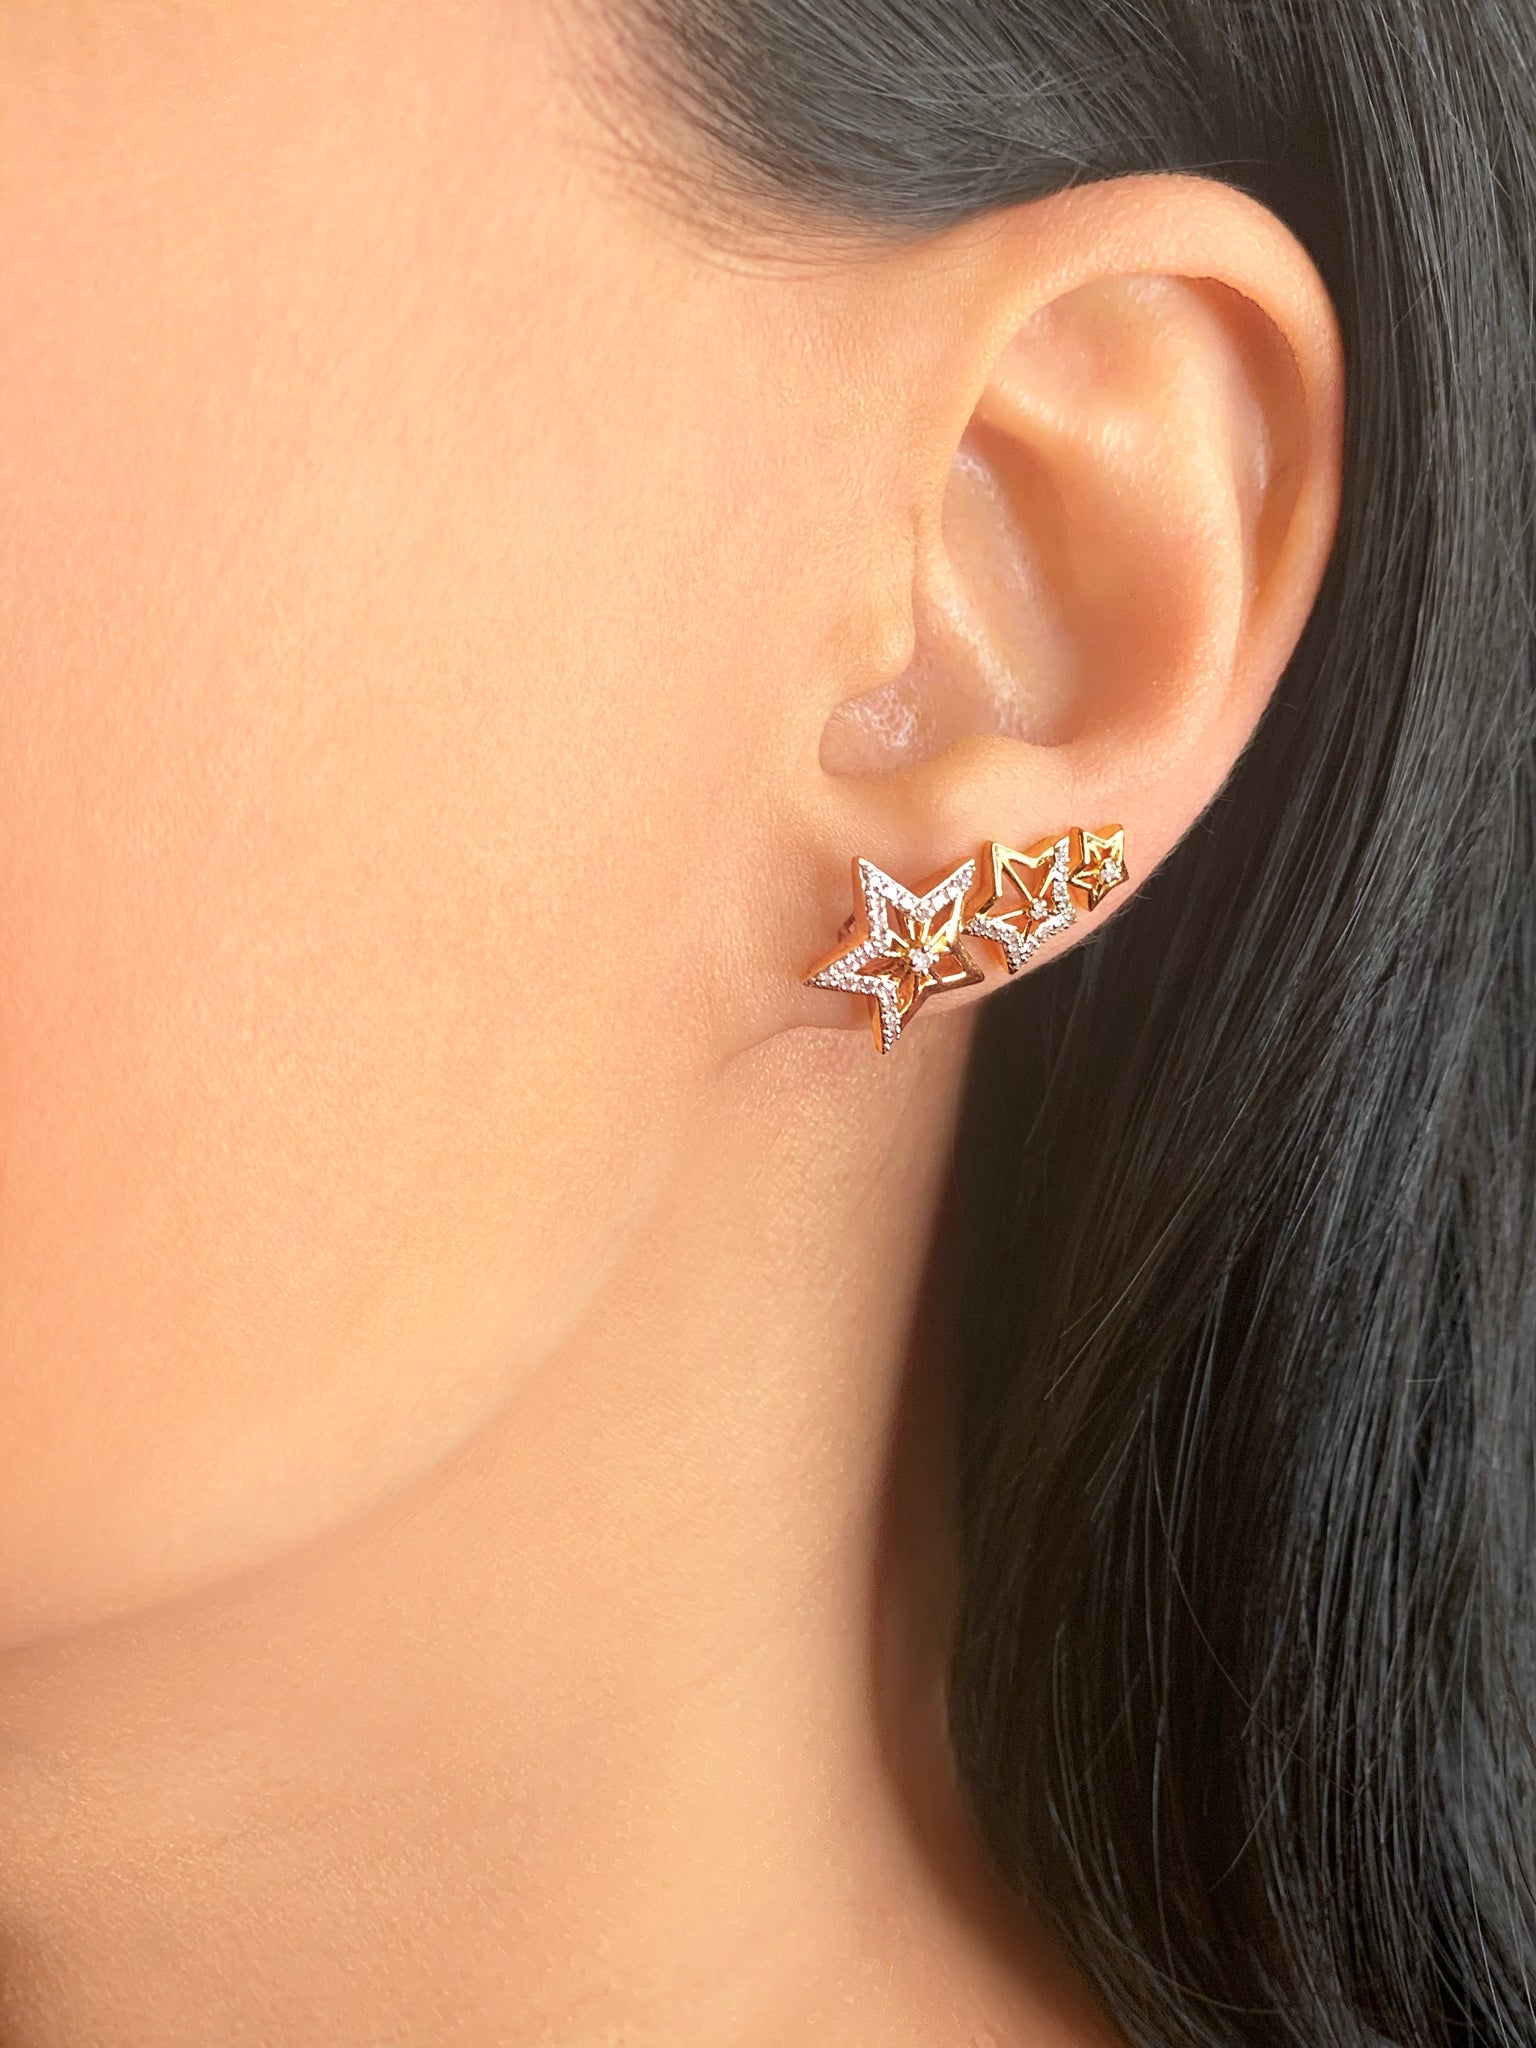 Sterling Silver Starburst Diamond Ear Climbers - 100% Natural Diamonds, 0.21 Carats, Handmade to Order - Jewelry & Watches - Bijou Her -  -  - 